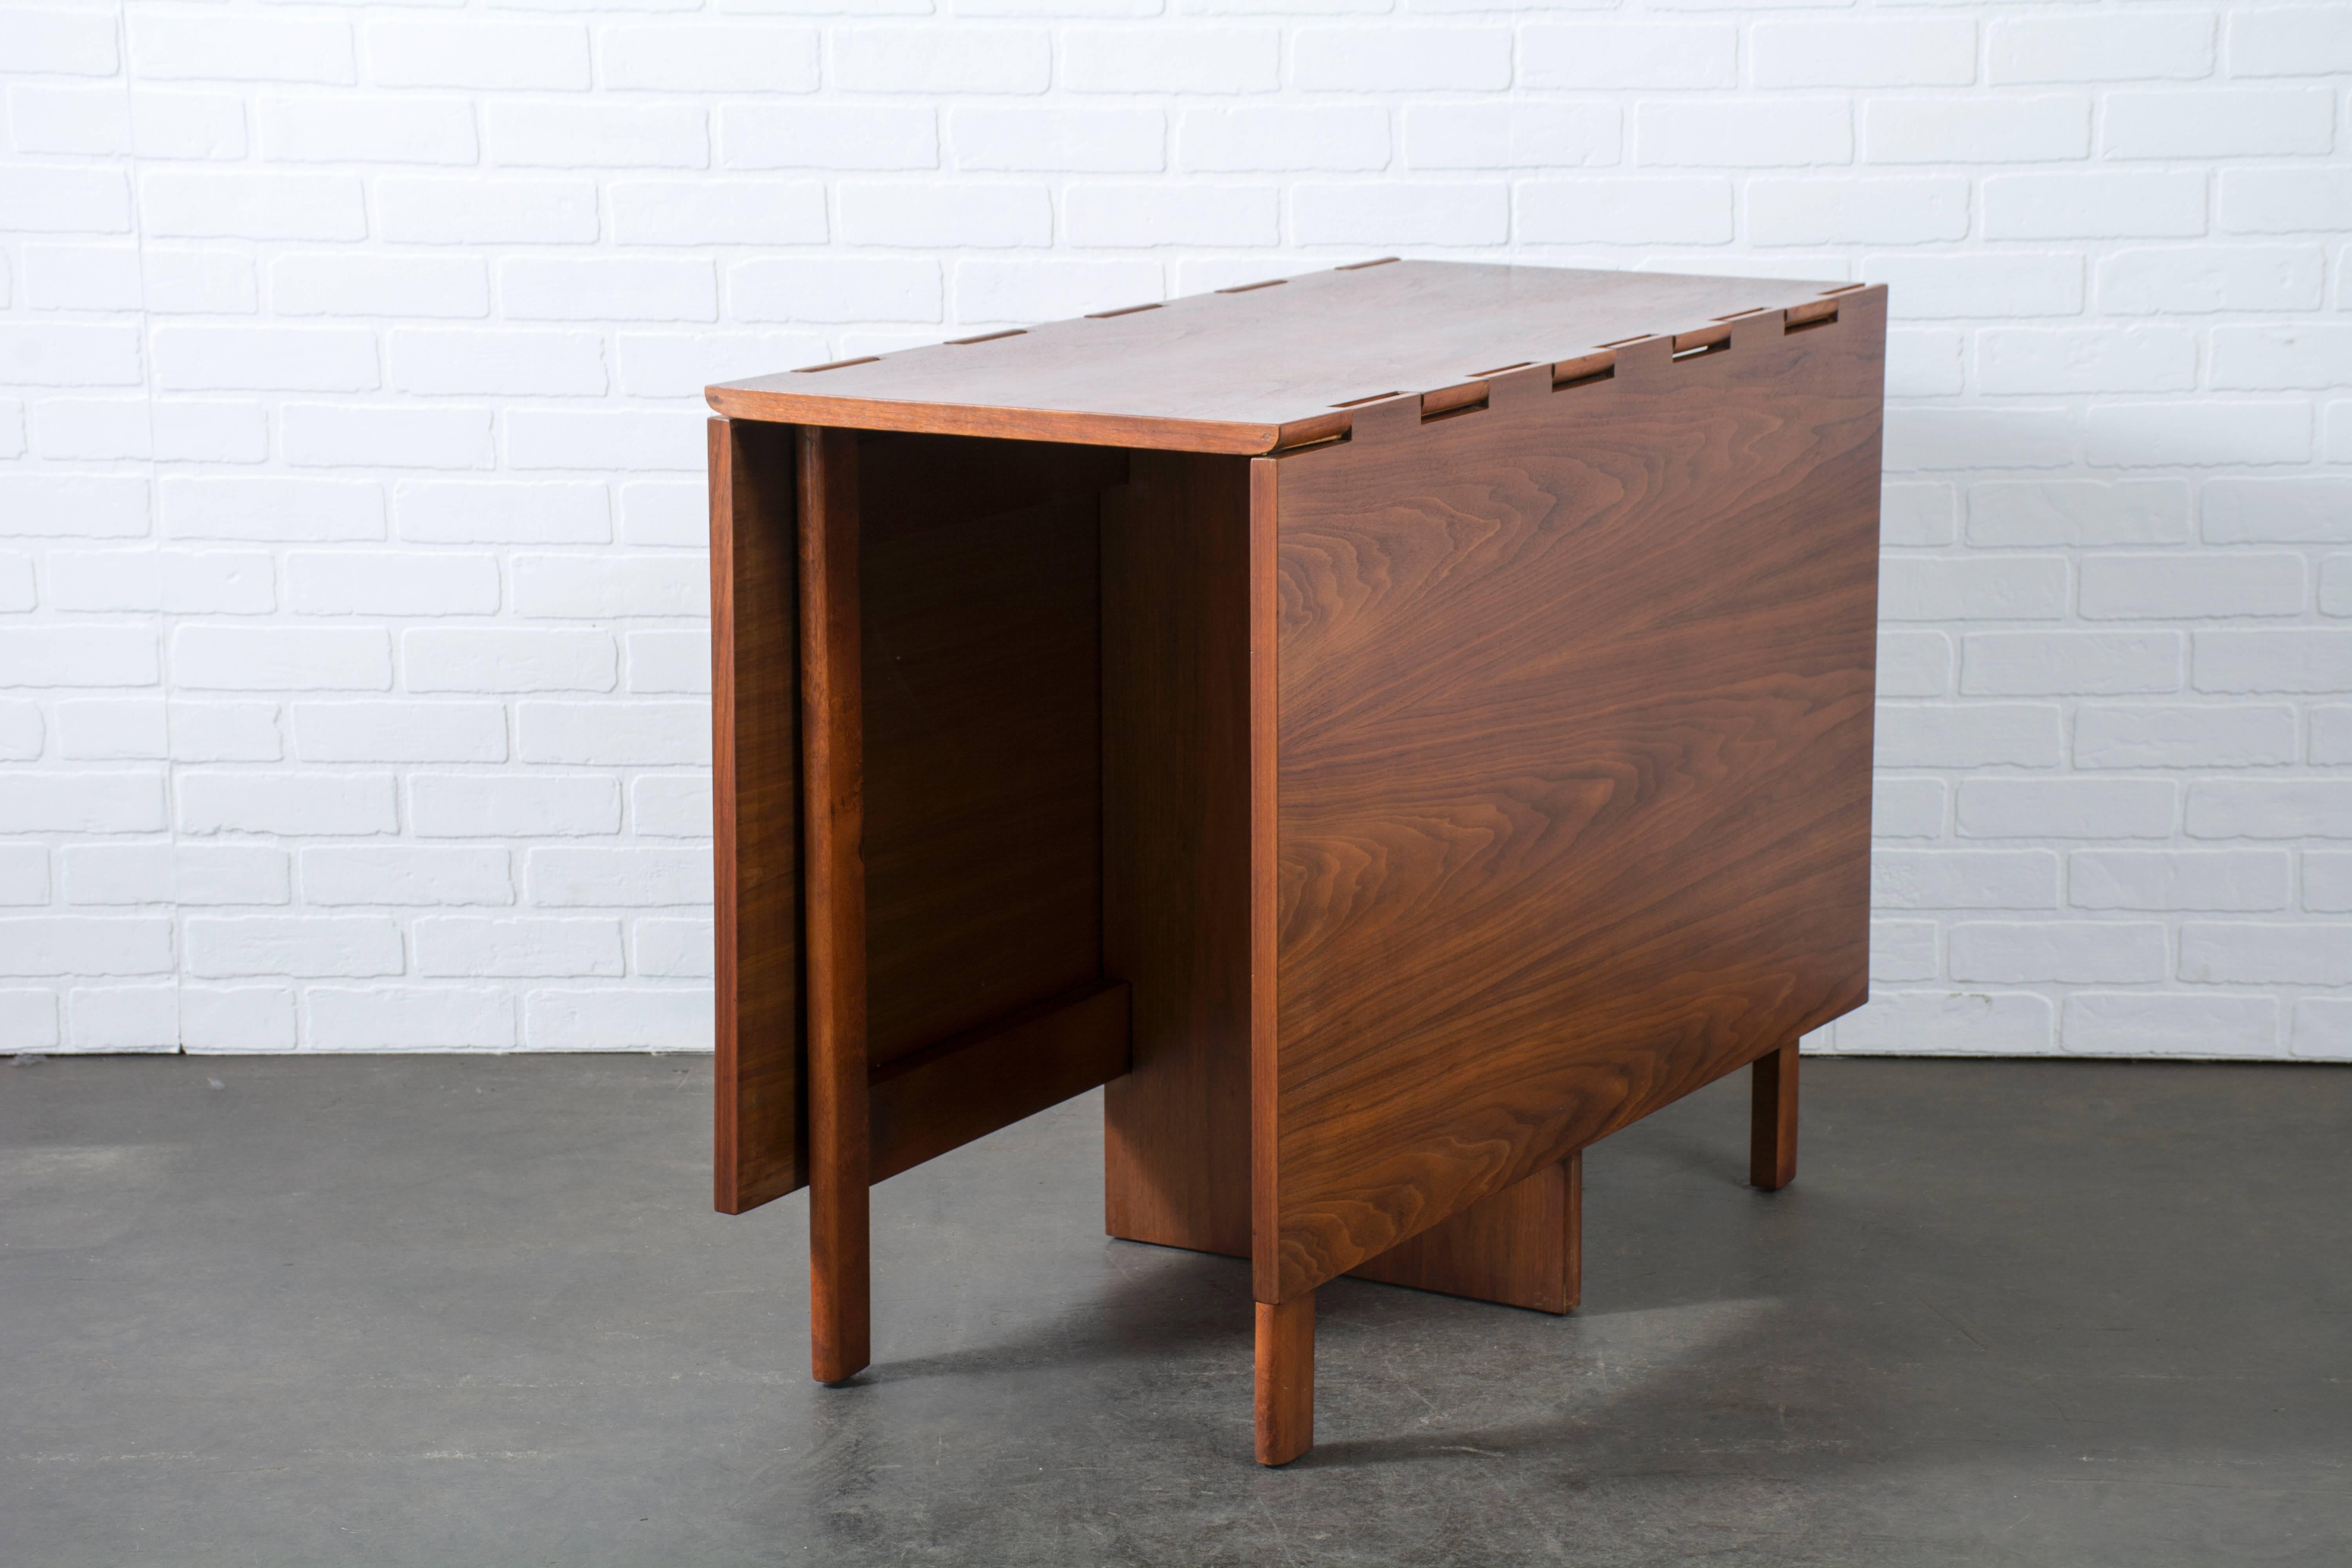 This walnut drop-leaf dining table was designed by George Nelson for Herman Miller in the 1950s. It can be used as a desk, work table or dining table that seats up to six. Measures: 18.5